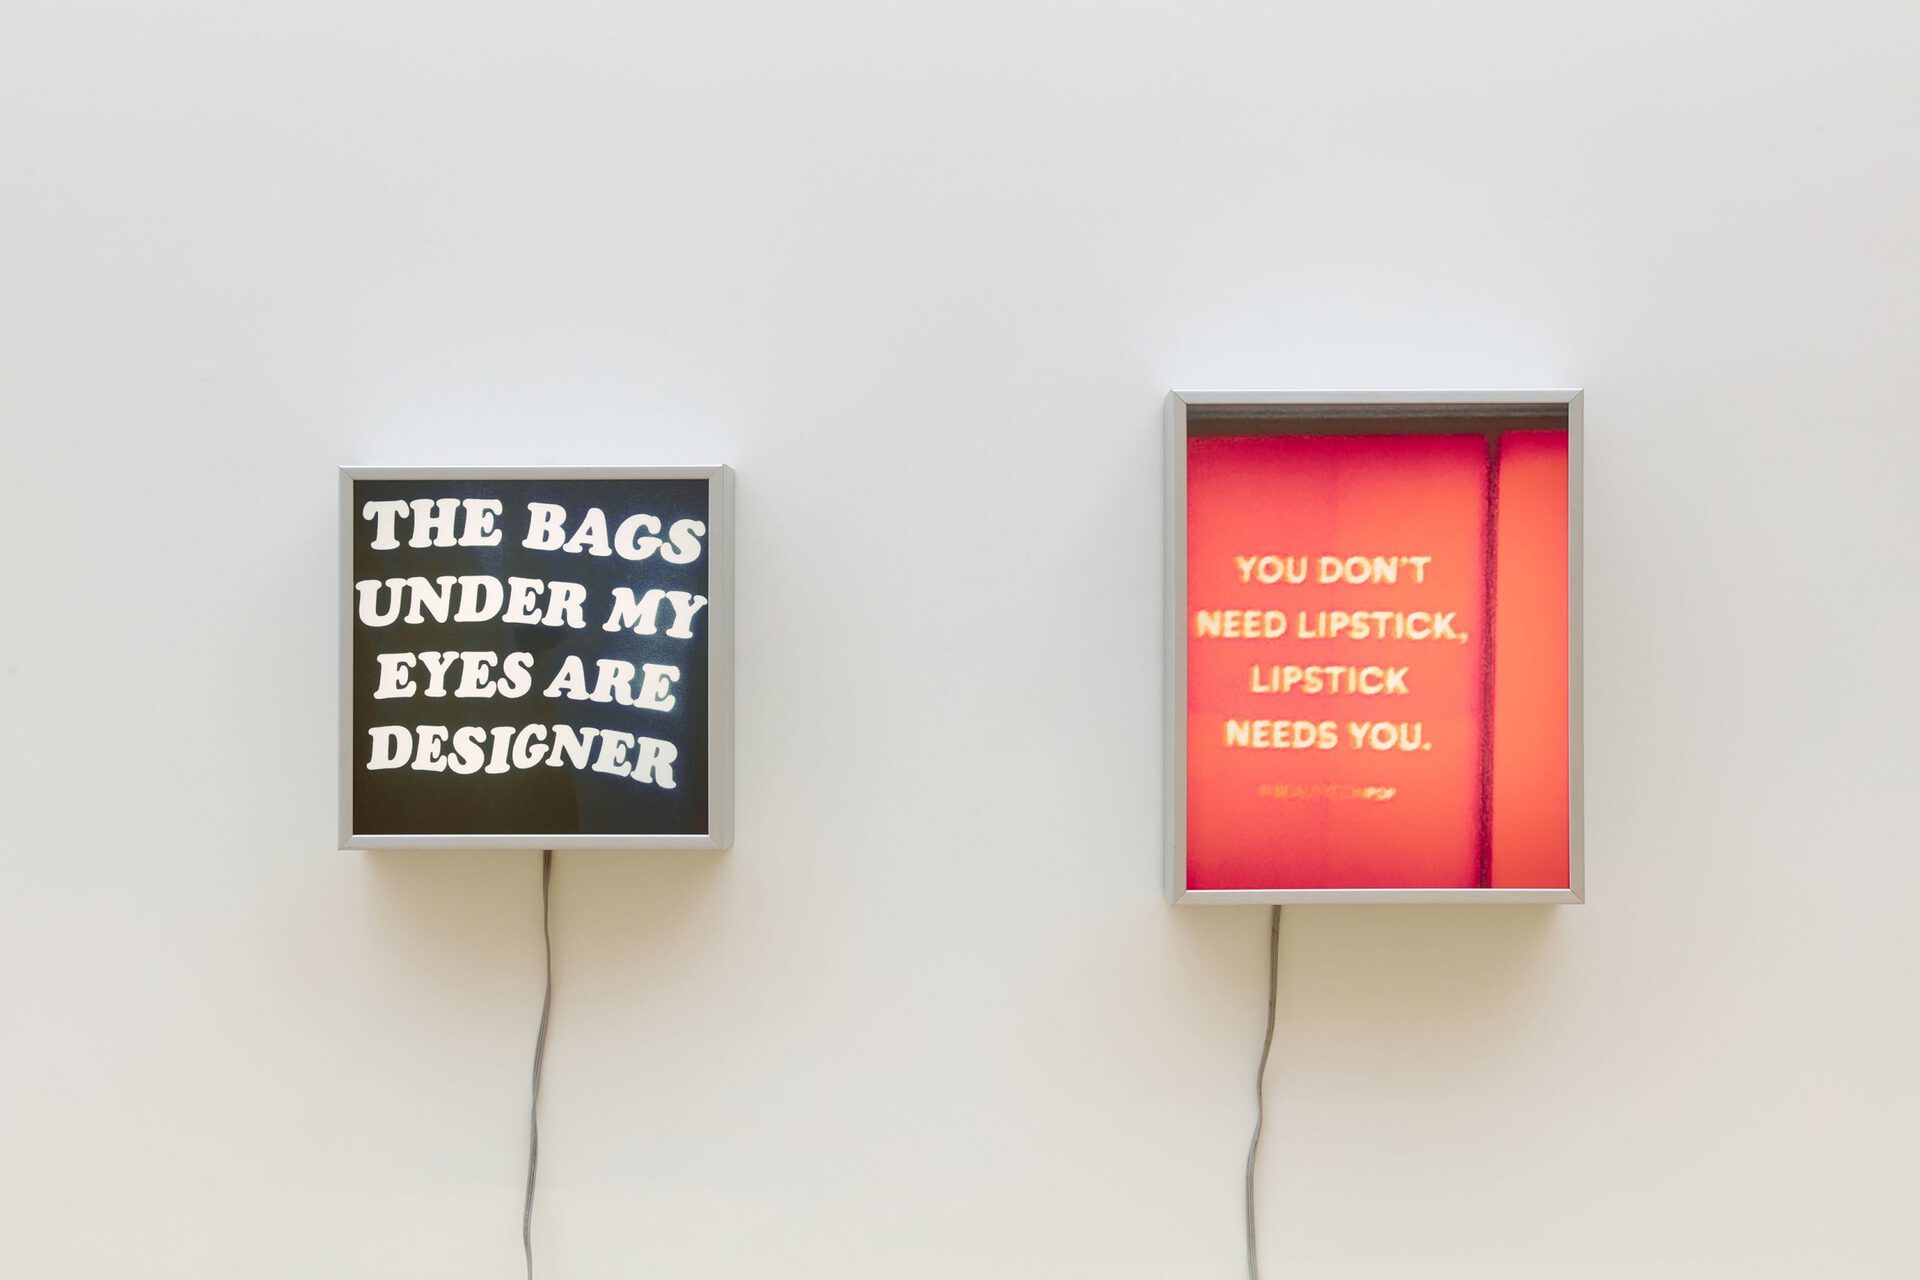 Ellen Schafer, Left: Shiny Happy People (Laughing) (The bags under my eyes are designer), 2020, Illuminated sign, digital print on backlit film, 15.5 x 15.5 inches; Right: Shiny Happy People (Laughing) (You don't need lipstick, lipstick needs you), 2020, Illuminated sign, digital print on backlit film, 21.5 x 16.5 inches.